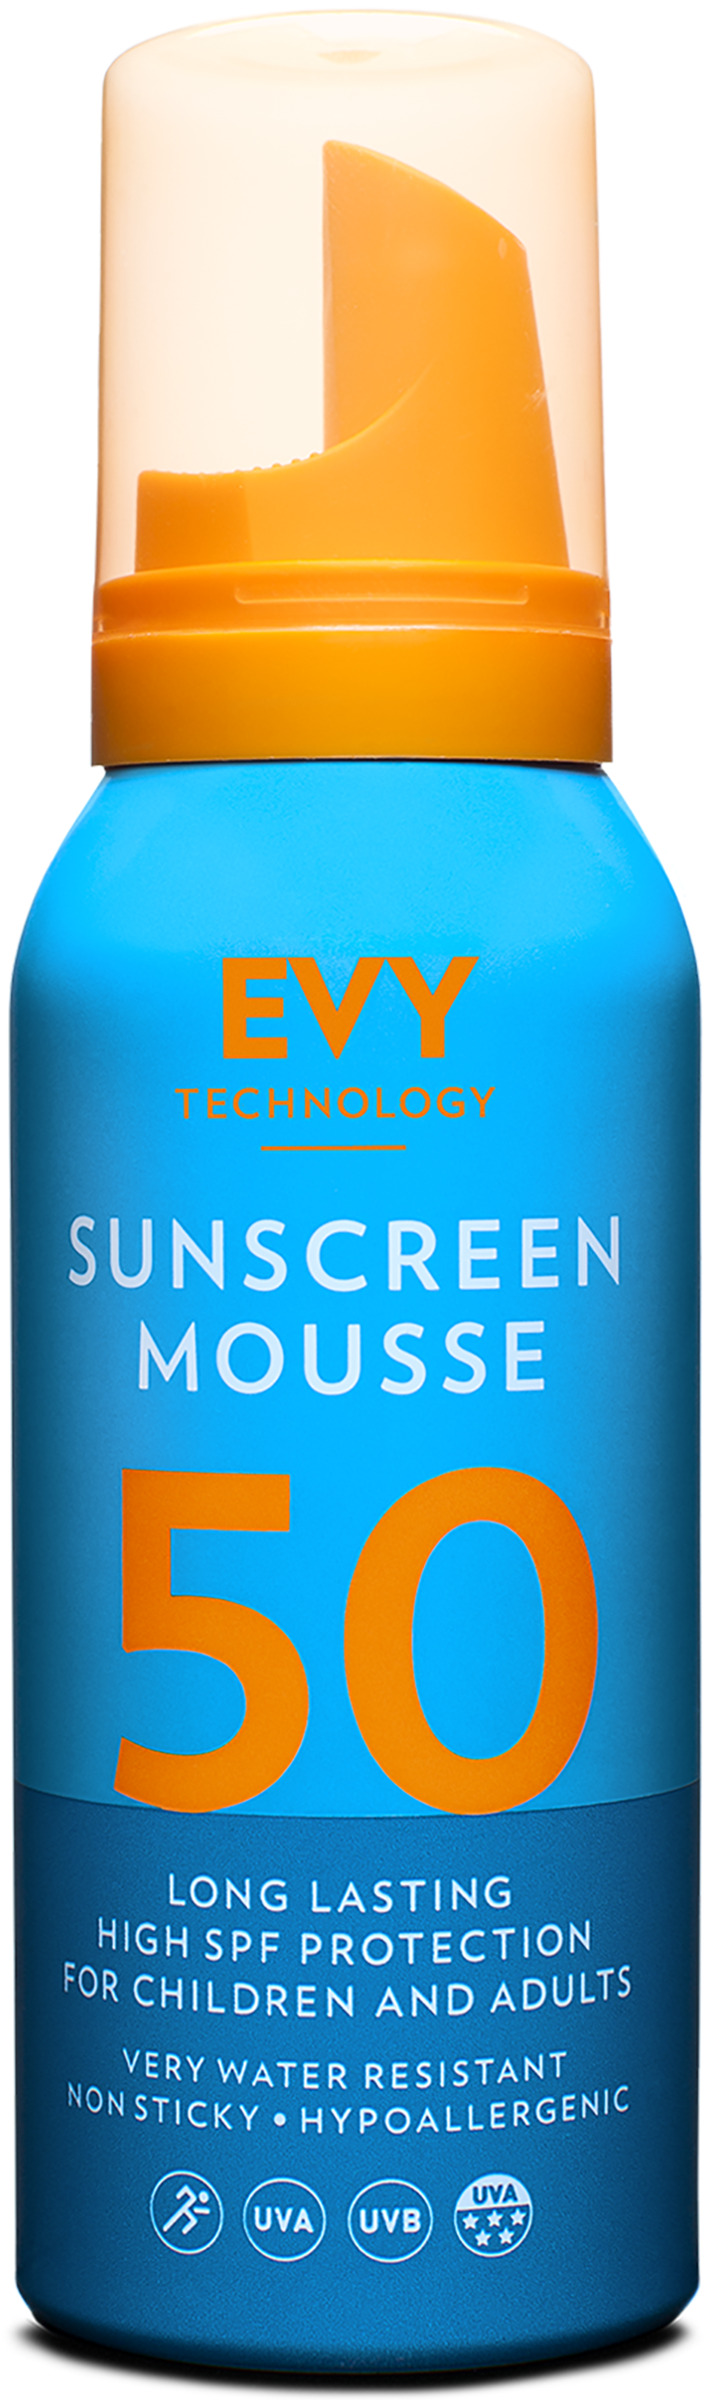 Evy Sunscreen Mousse Oparf SPF50 100ml